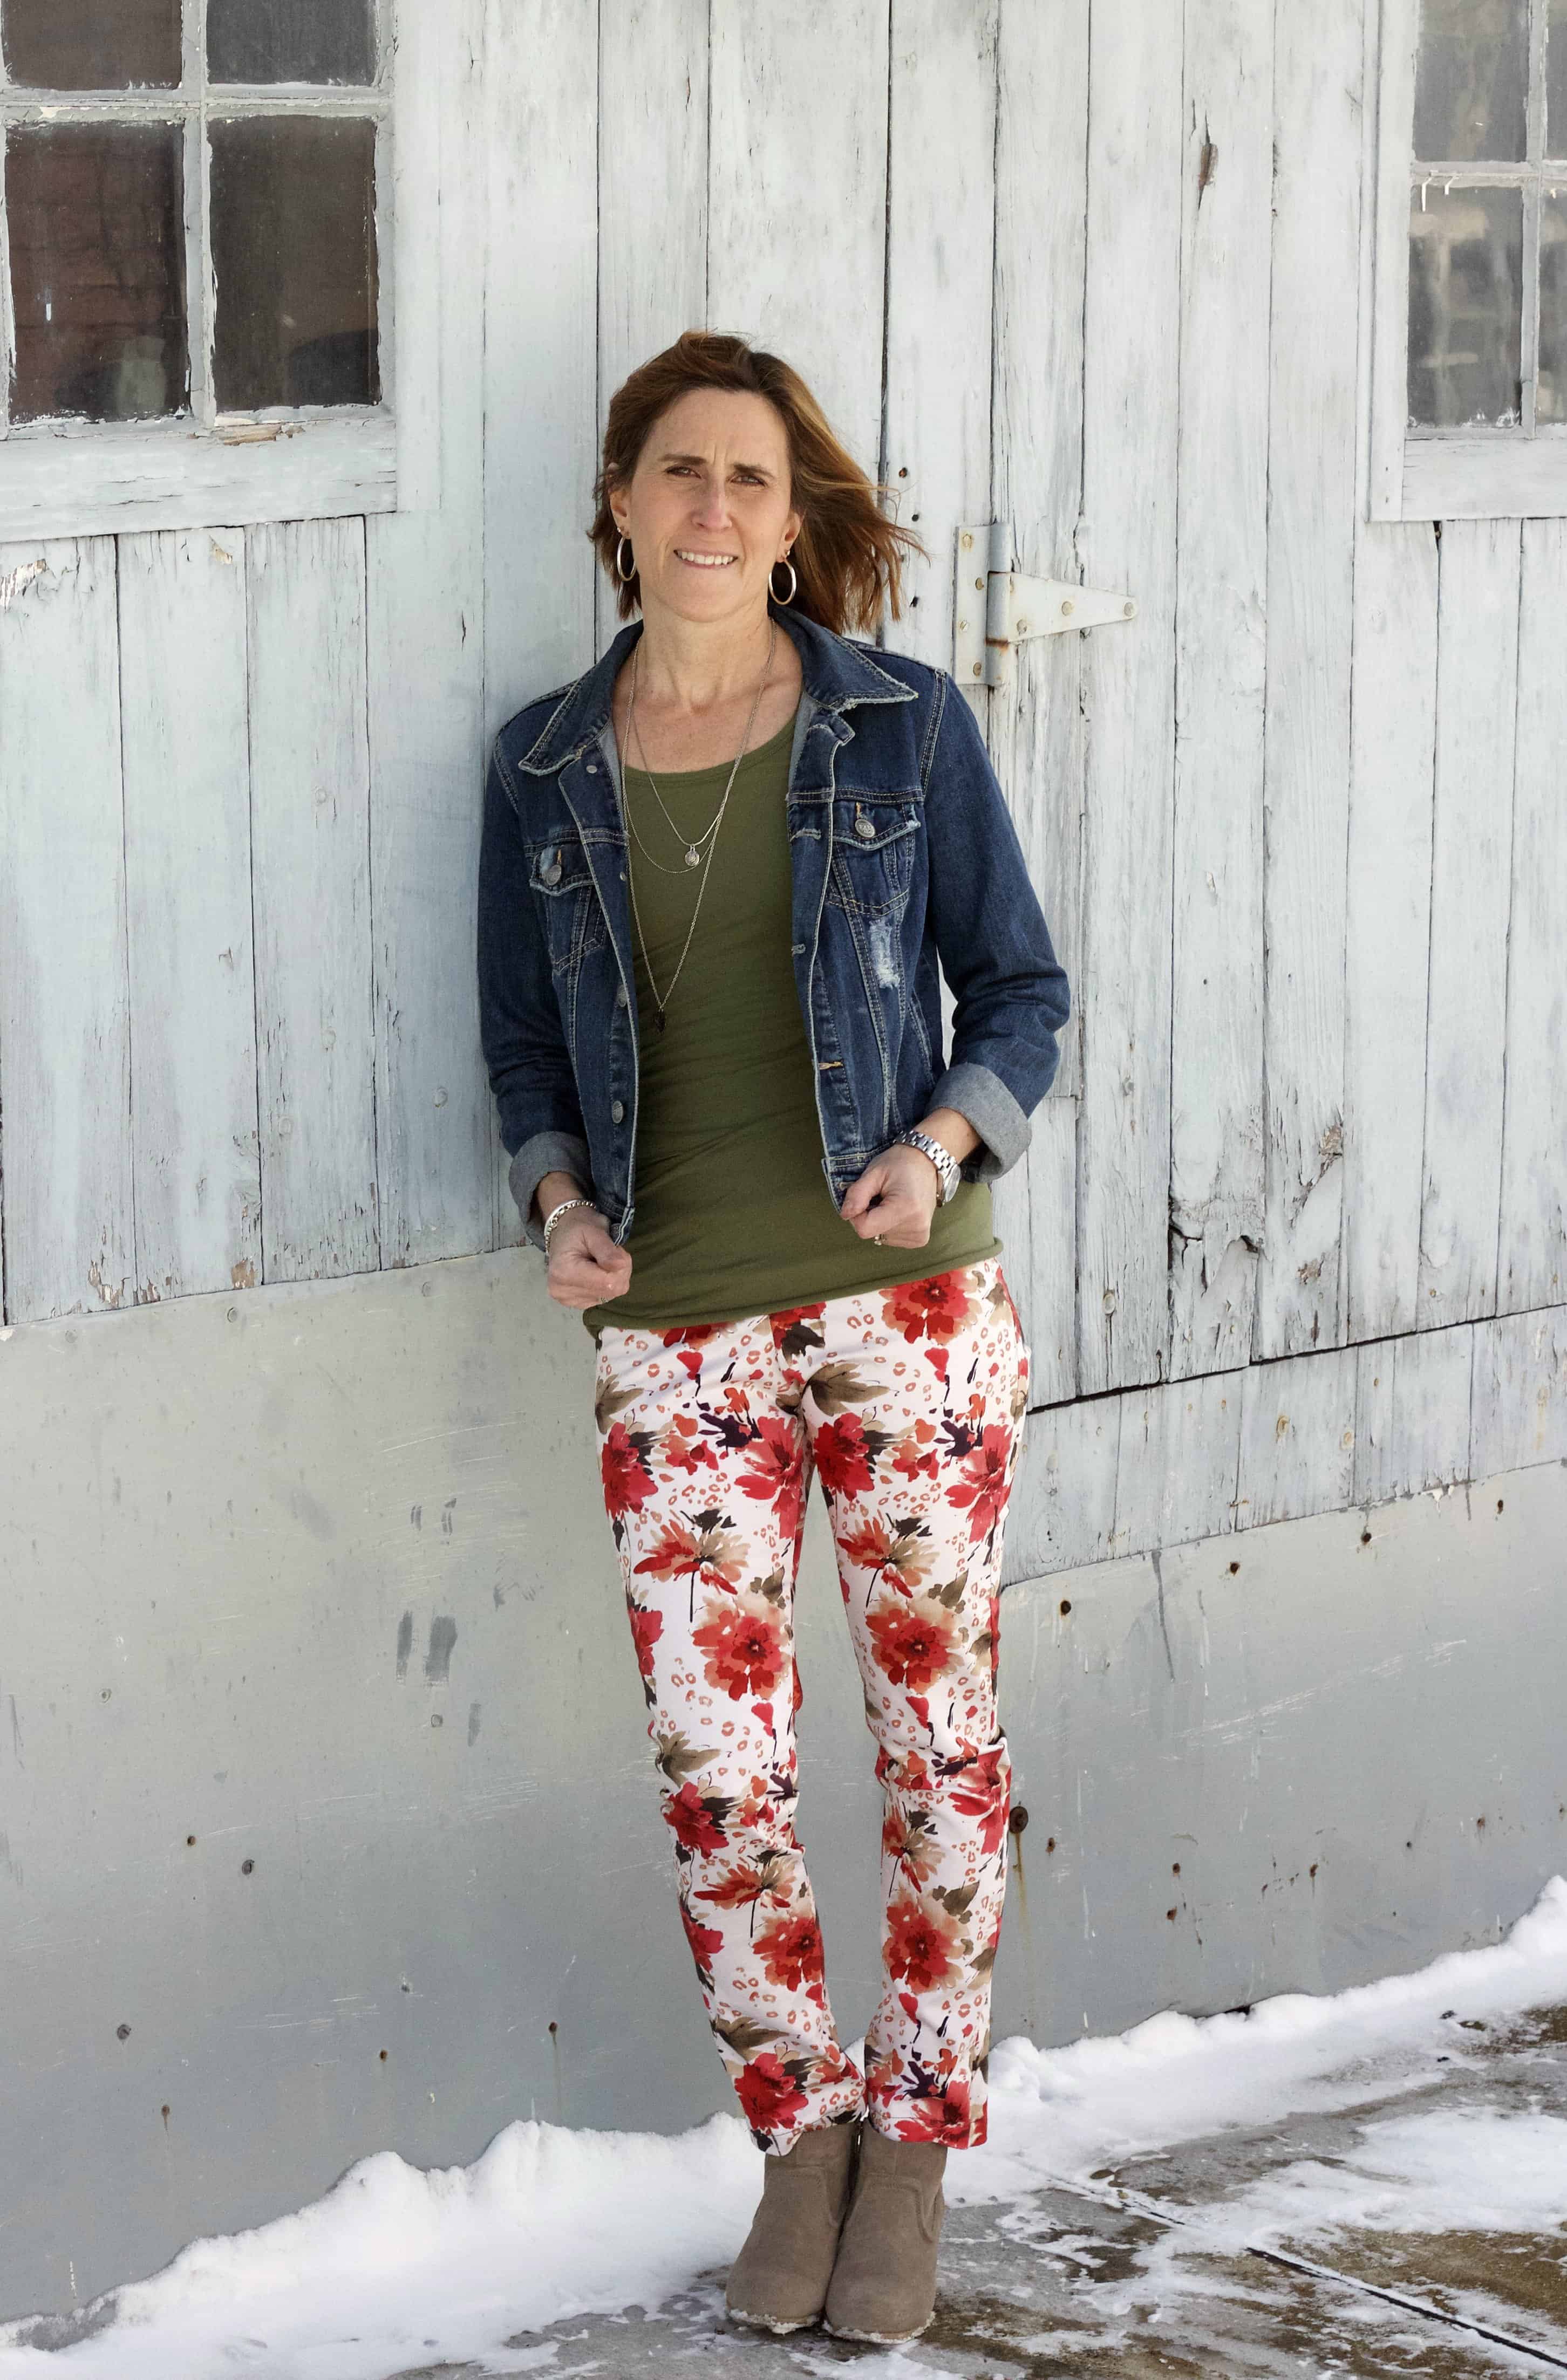 Ladies pull-on pants sewing pattern by Love Notions.